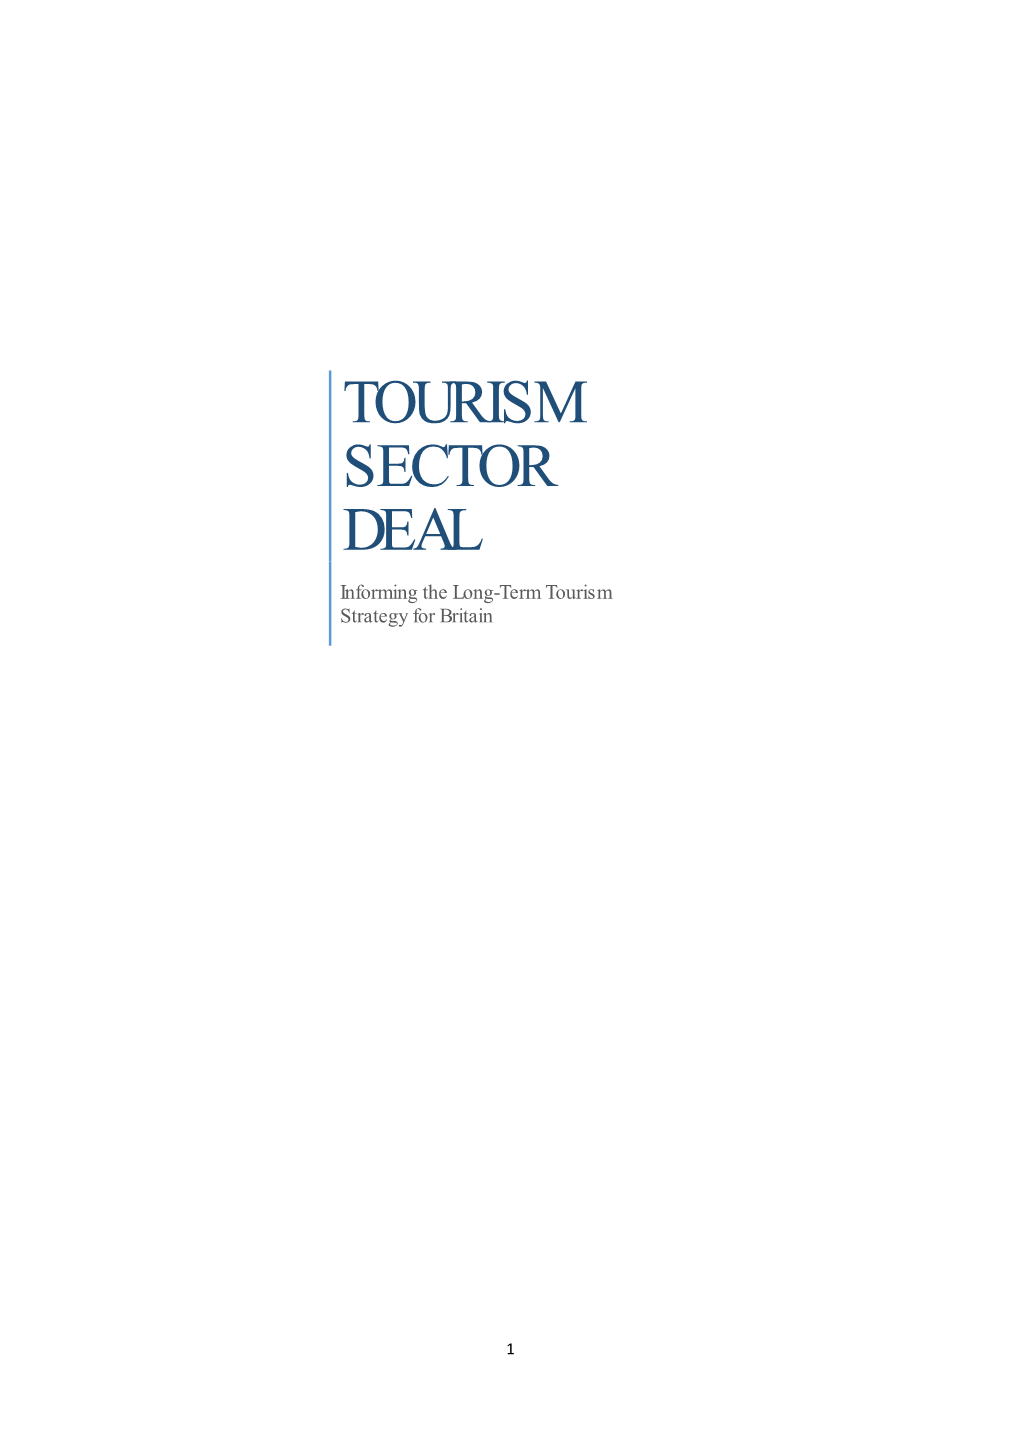 Industrial Strategy Tourism Sector Deal Bid Informing the Long-Term Tourism Strategy for Britain